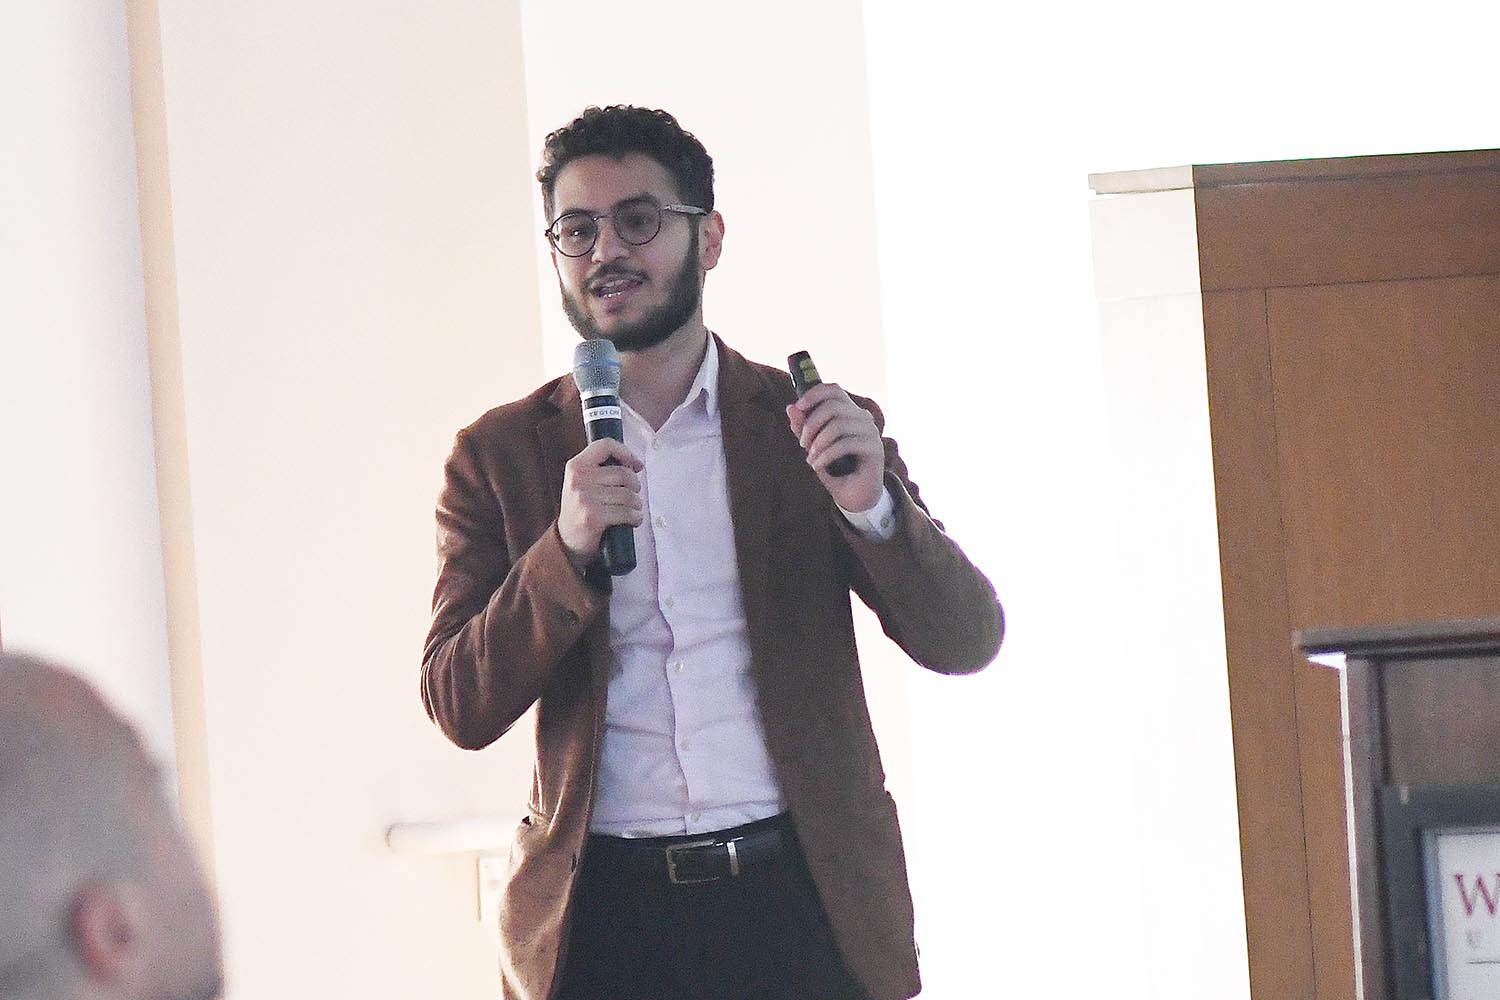 Ahmed Badr ‘20, who defines himself as an "Iraqi, Muslim refugee" garnered support for his organization, Narratio. Narratio activates, supports, and highlights the creative expression of displaced young people through publishing, fellowships, workshops, and partnerships. 